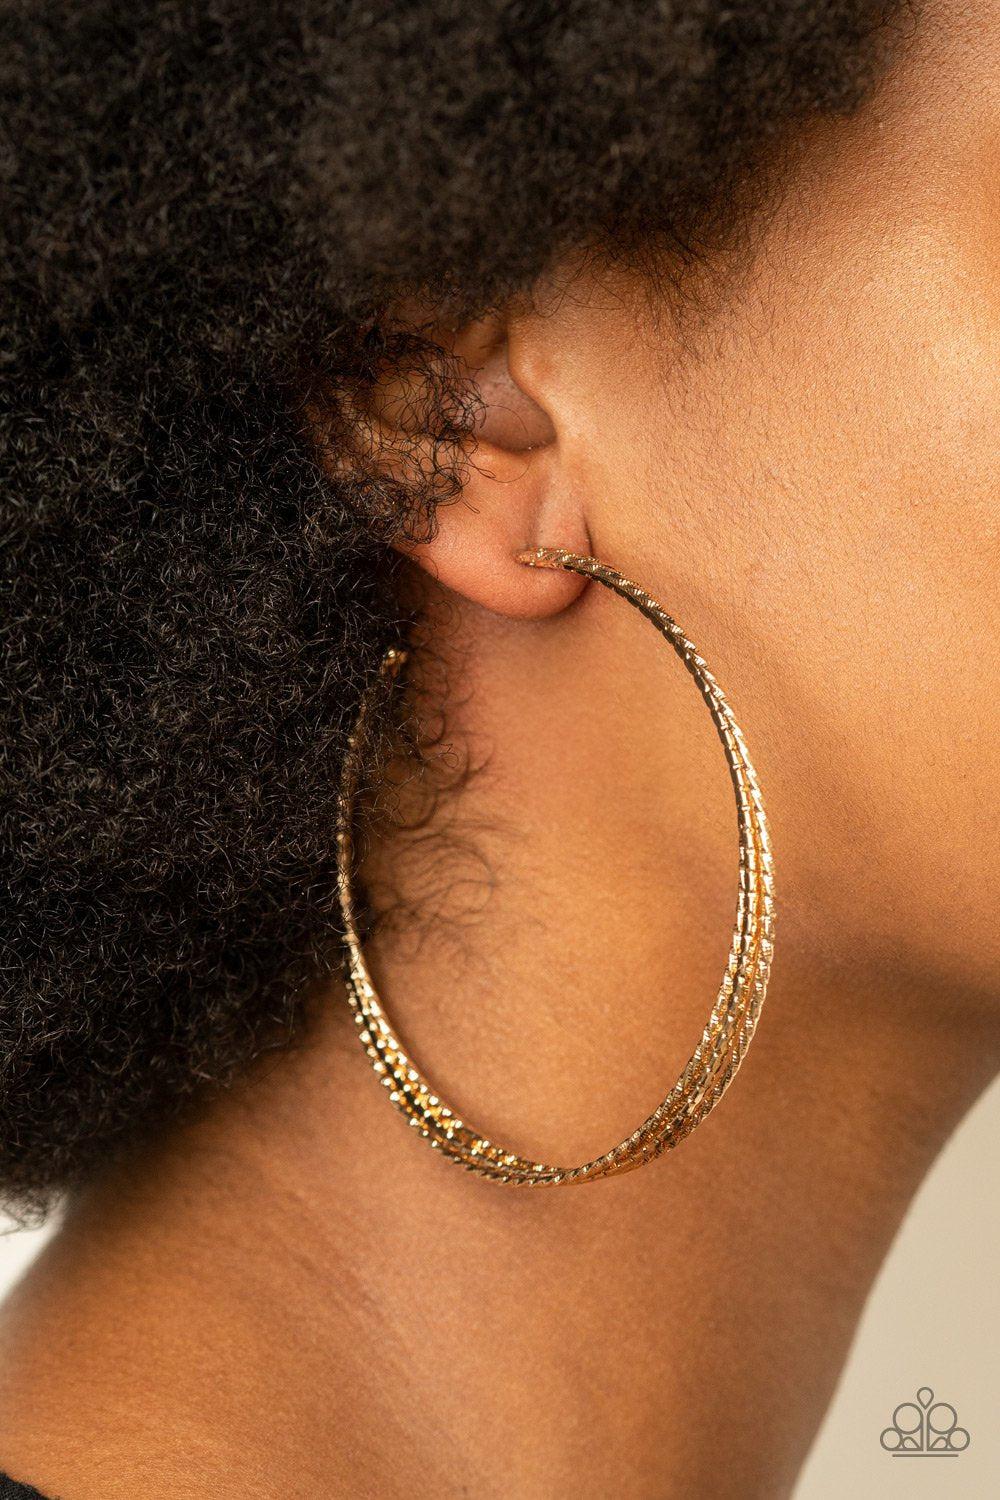 Watch and Learn Gold Hoop Earrings - Paparazzi Accessories - model -CarasShop.com - $5 Jewelry by Cara Jewels